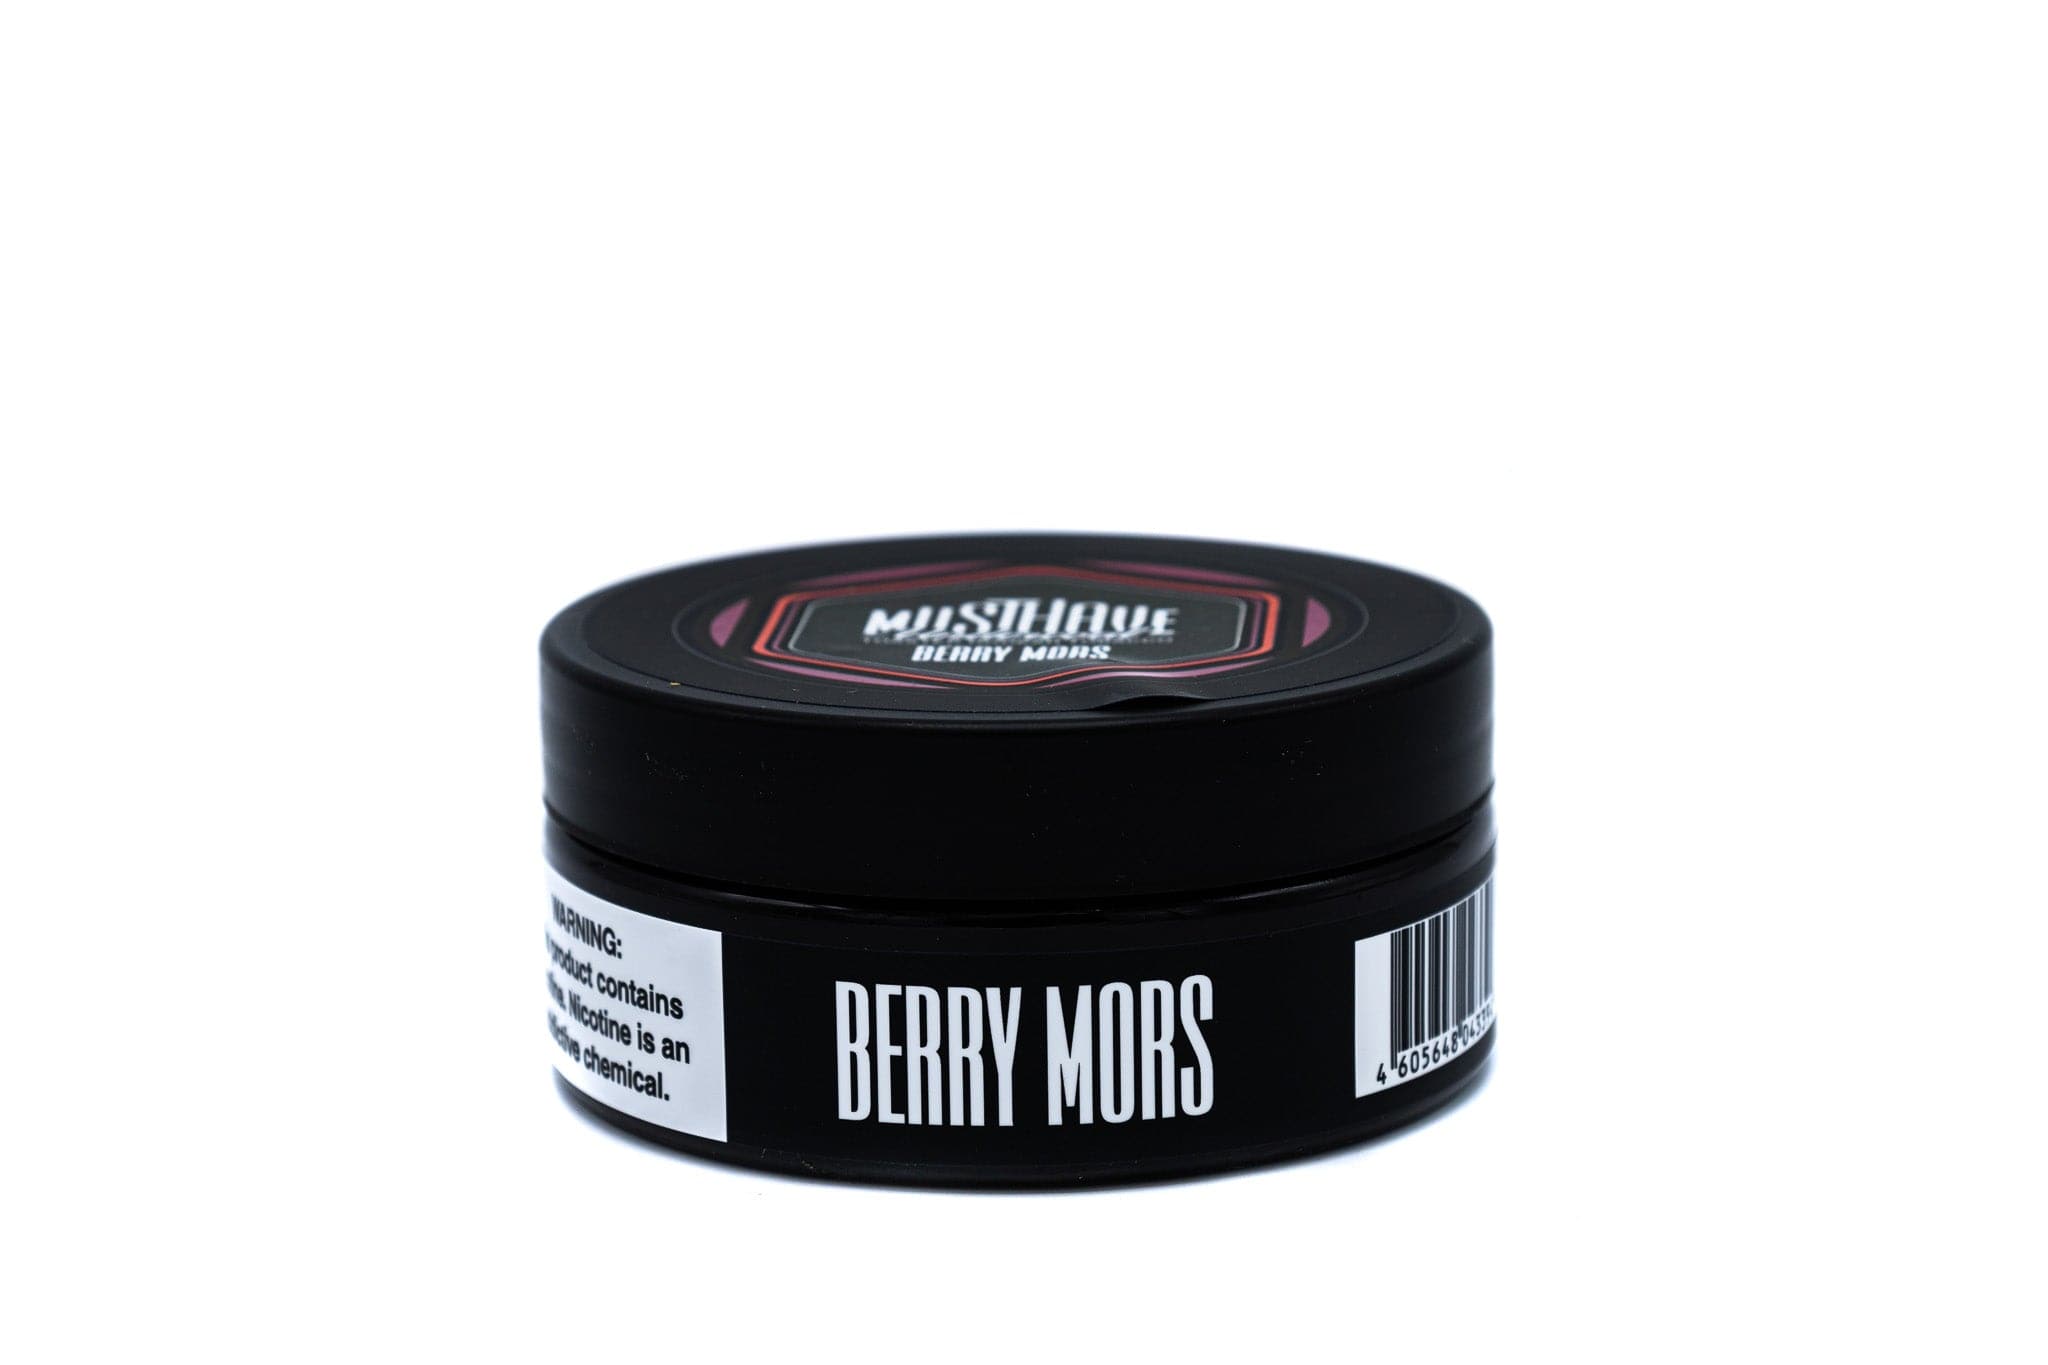 Musthave Berry Mors 125G - Smoxygen